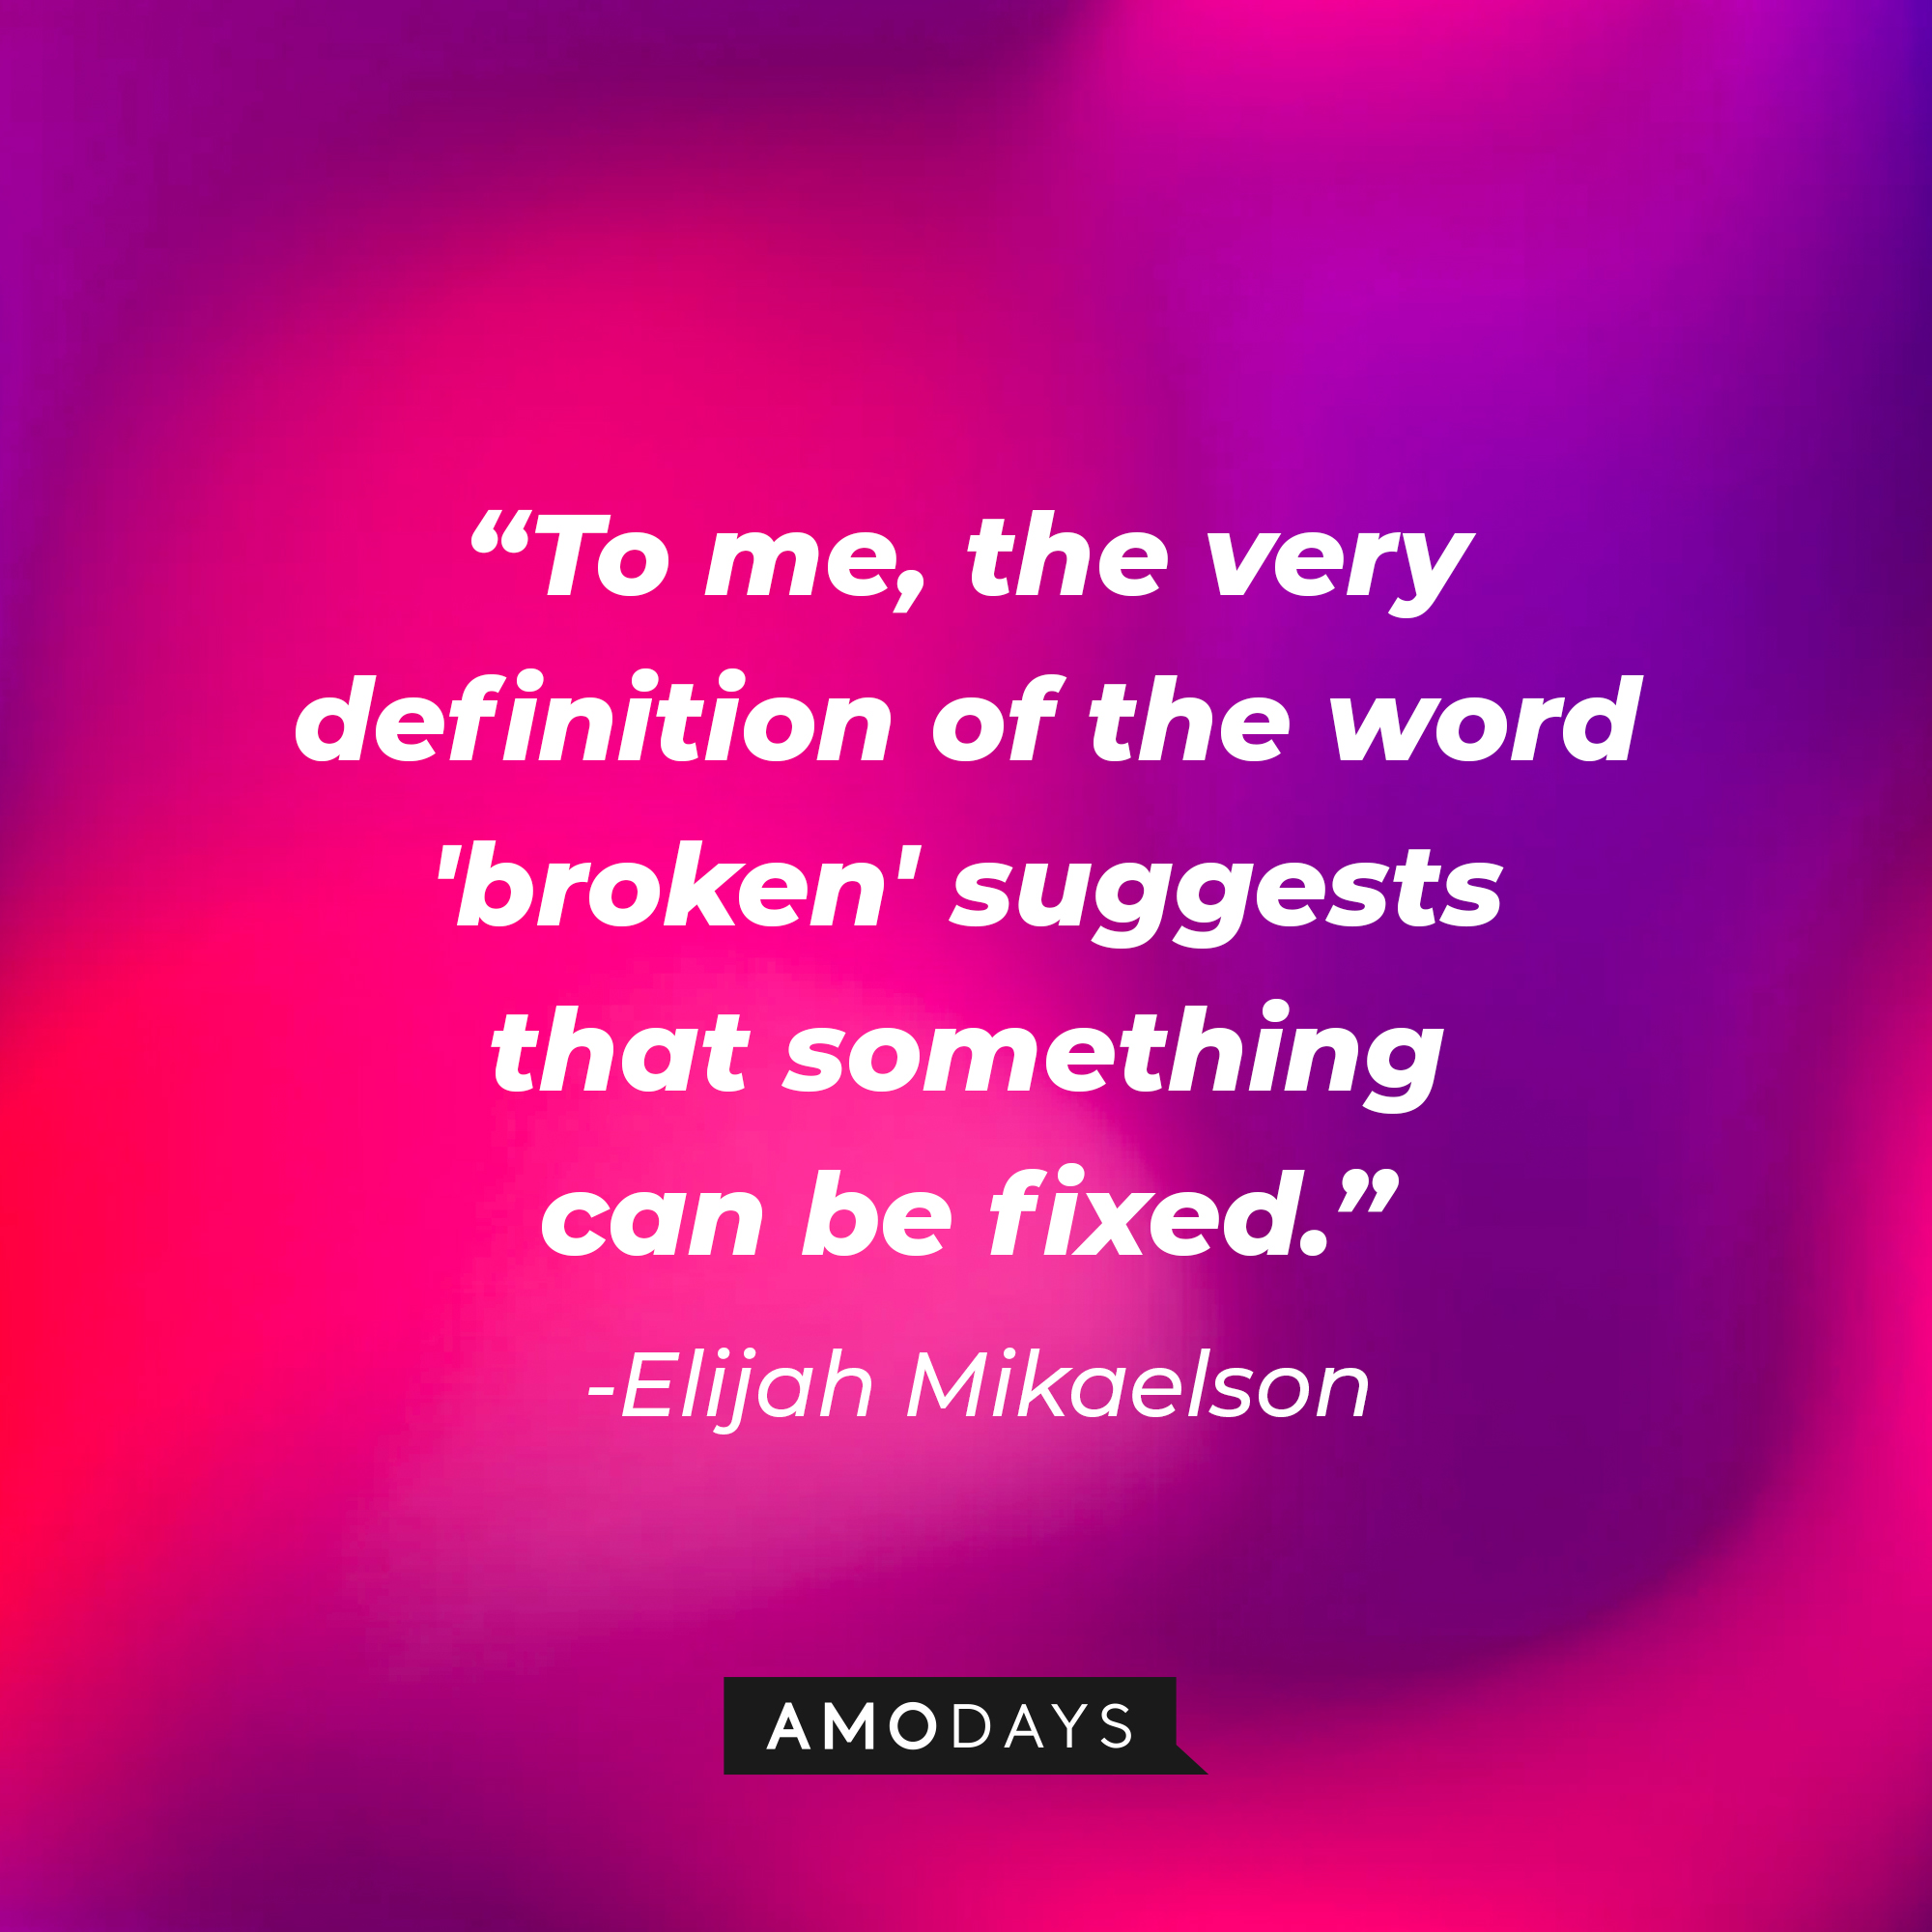 Elijah Mikaelson's quote: "To me, the very definition of the word 'broken' suggests that something can be fixed." | Source: facebook.com/thevampirediaries